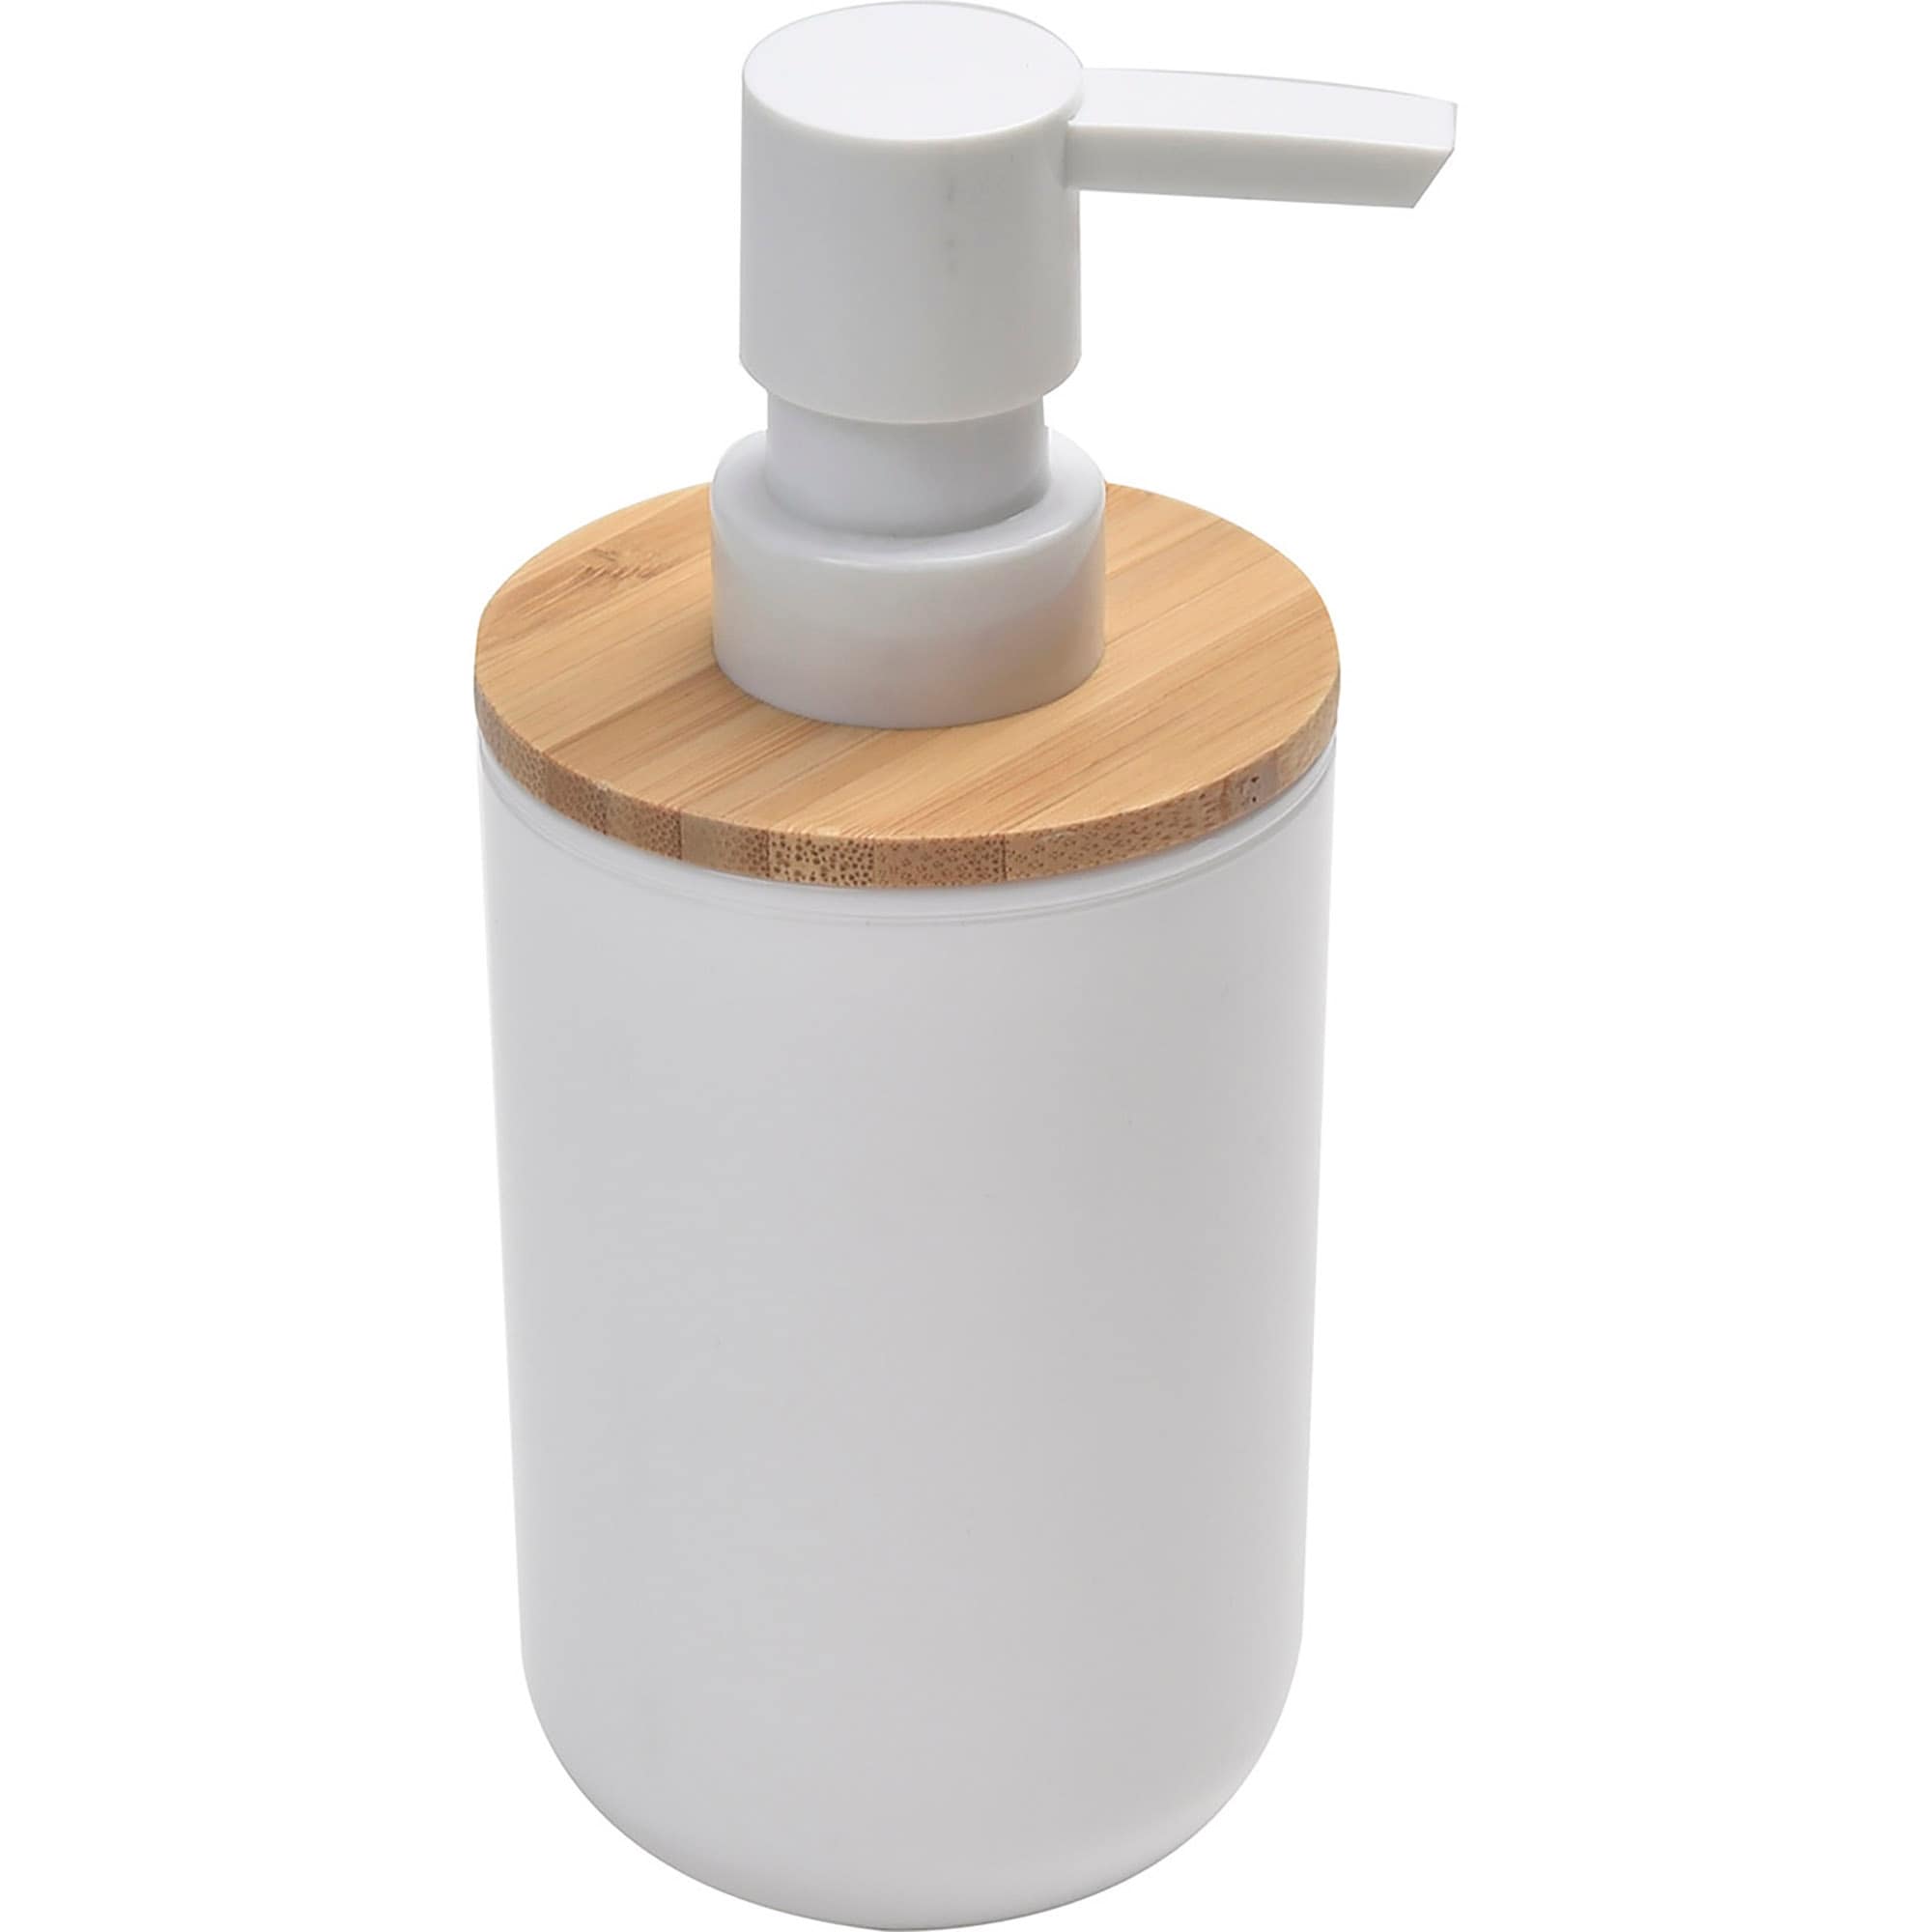 https://ak1.ostkcdn.com/images/products/is/images/direct/cab21184b9a0d607f7f89dfc483b835e03330705/Bathroom-Hand-Soap-%26-Lotion-Dispenser-PADANG-10-FL-OZ-White-Bamboo.jpg